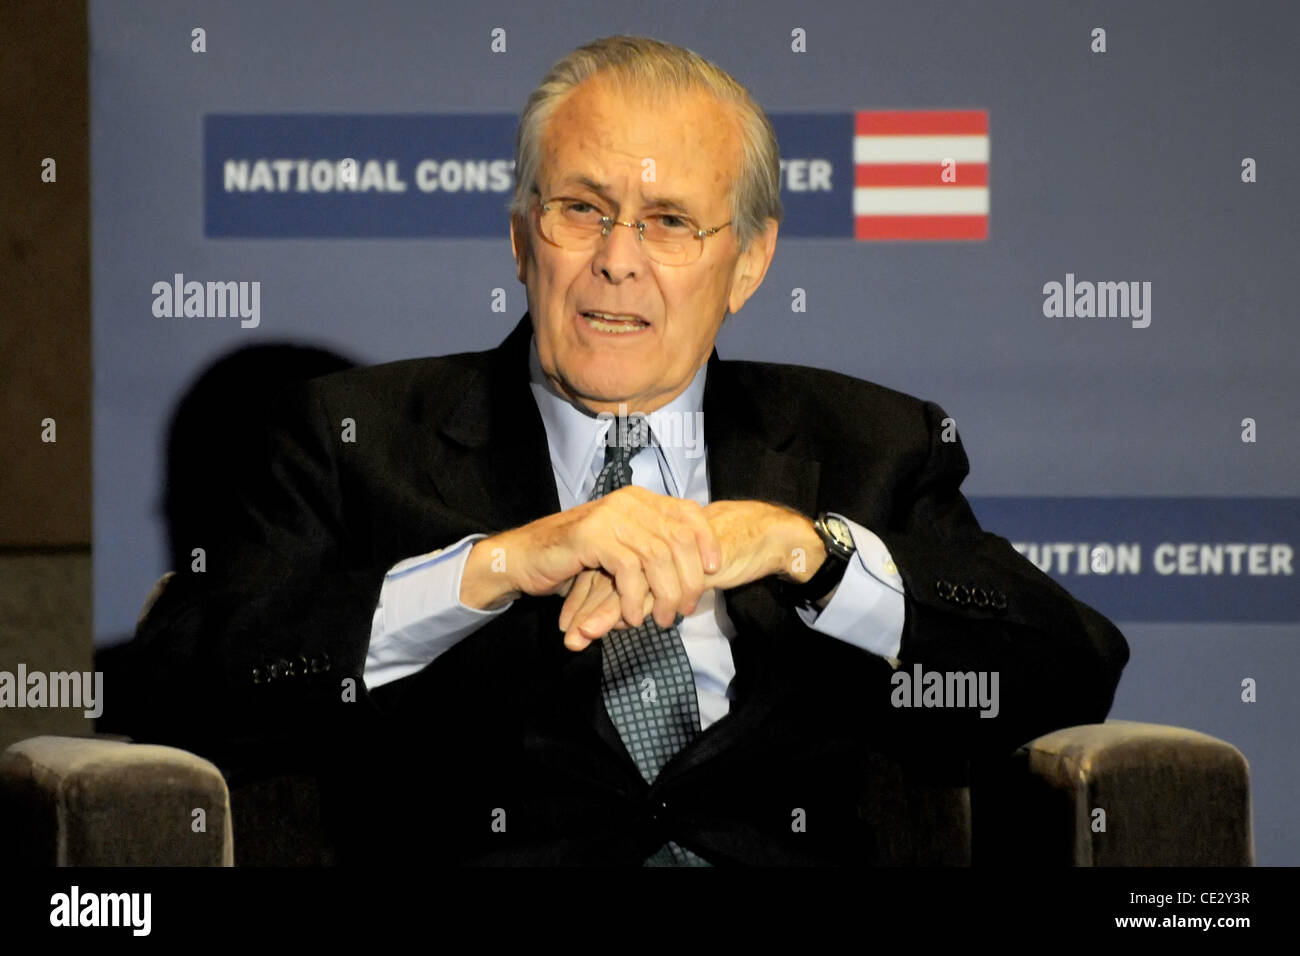 Donald Rumsfeld 21st United States Secretary of Defense promotes his book 'Known and Unknown: A Memoir' at The National Constitution Center Philadelphia, Pennsylvania - 09.02.11 Stock Photo